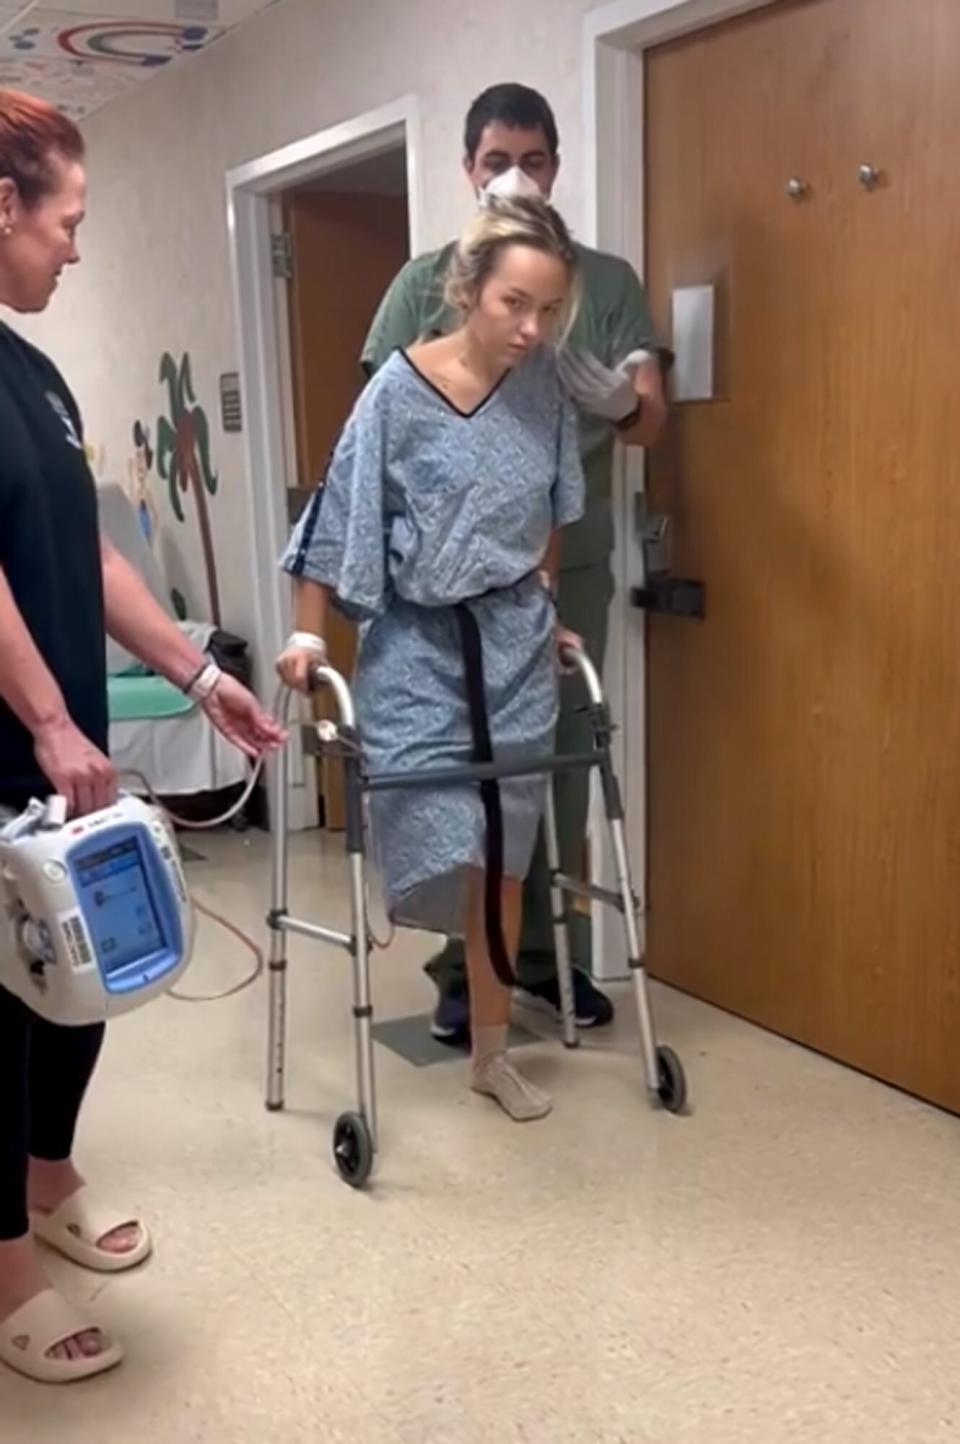 Teen Cheerleader Who Survived Shark Attack Takes First Steps After Getting Leg Amputated